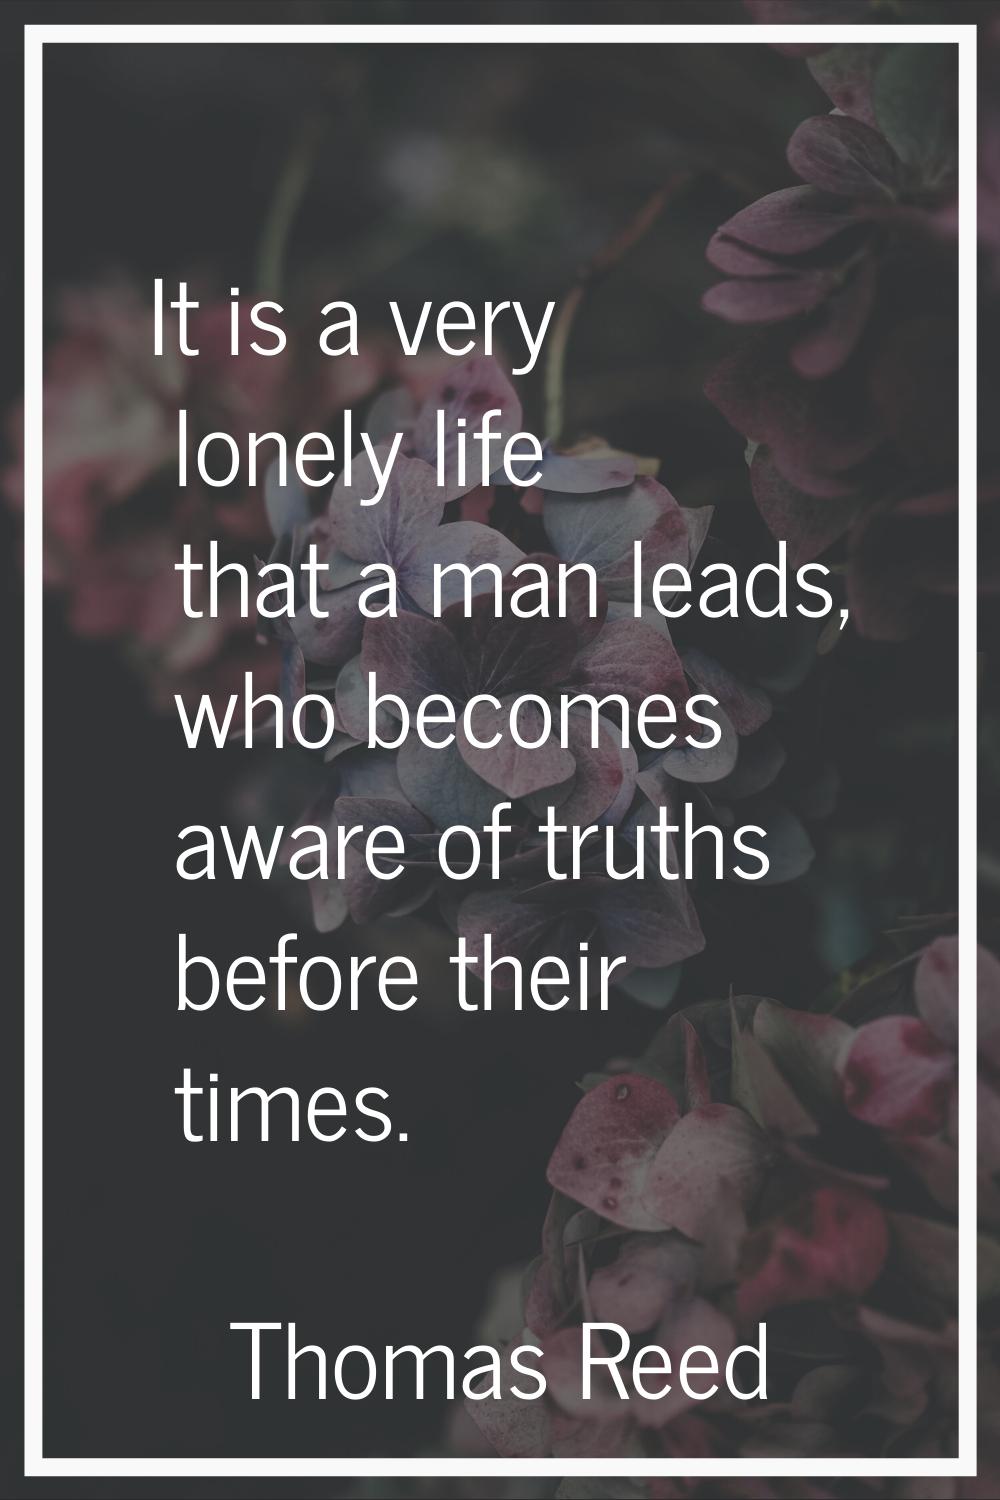 It is a very lonely life that a man leads, who becomes aware of truths before their times.